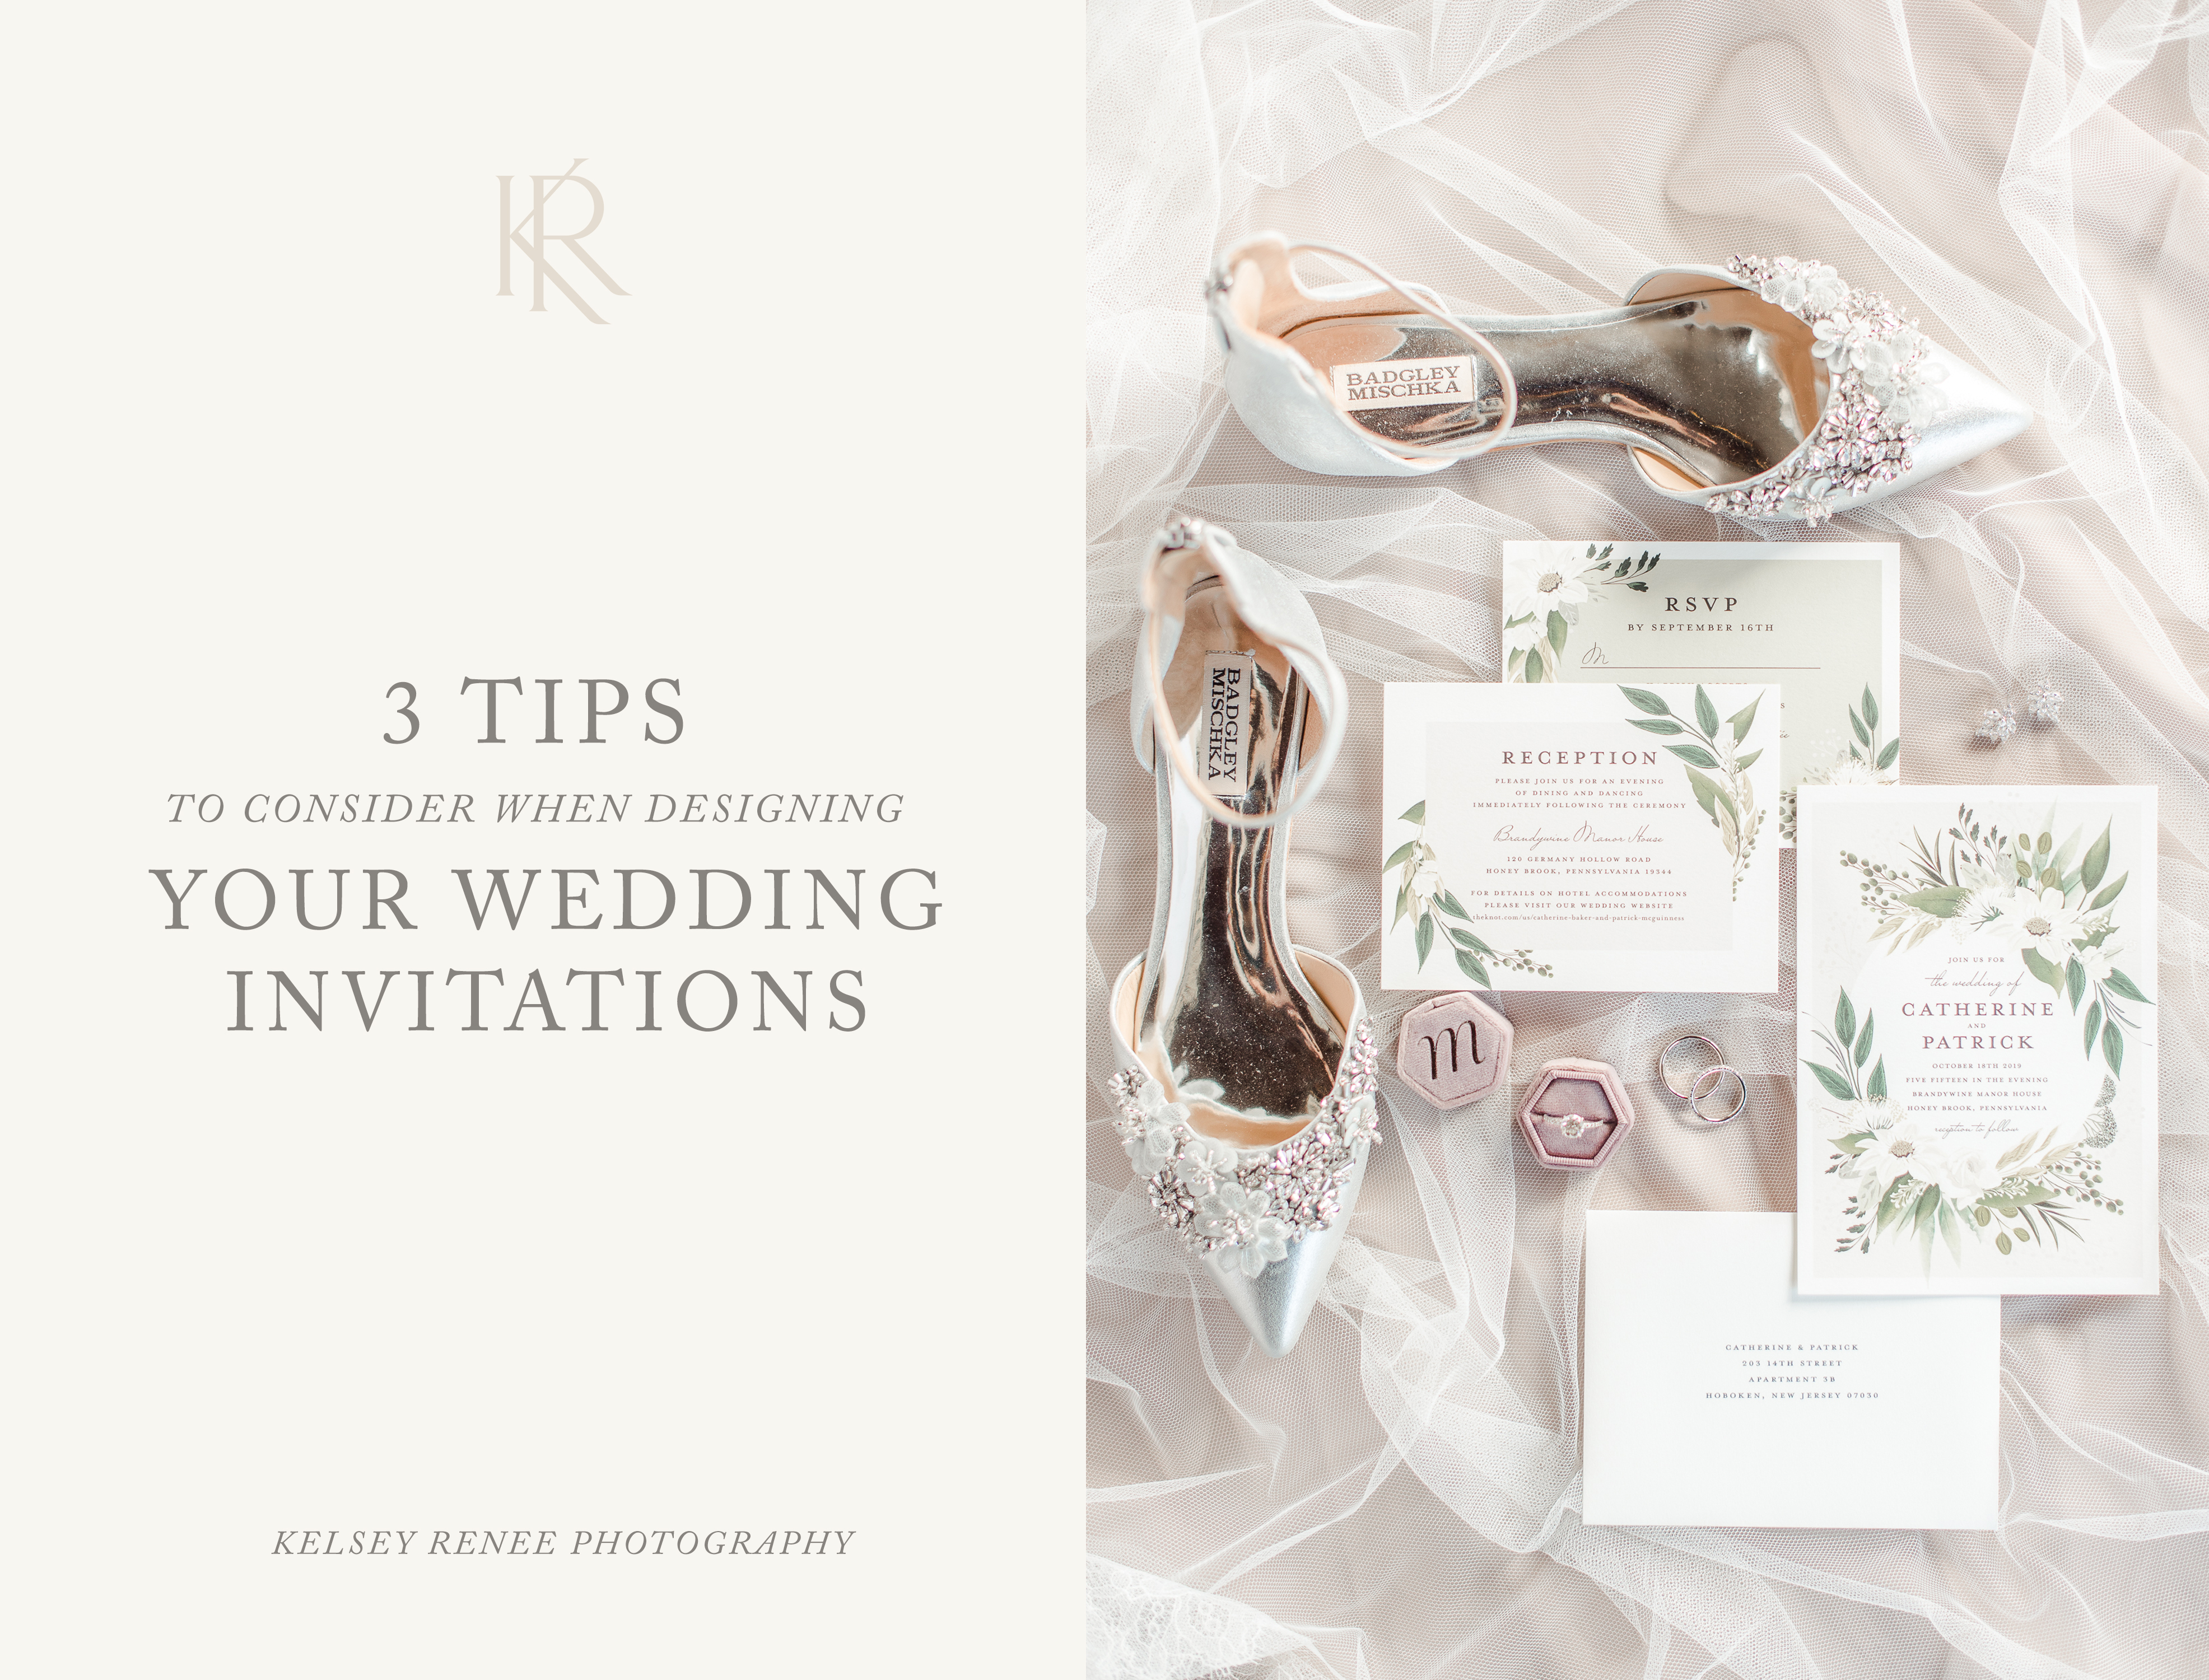 3 Tips to Consider when Designing Your Wedding Invitations by Kelsey Renee Photography